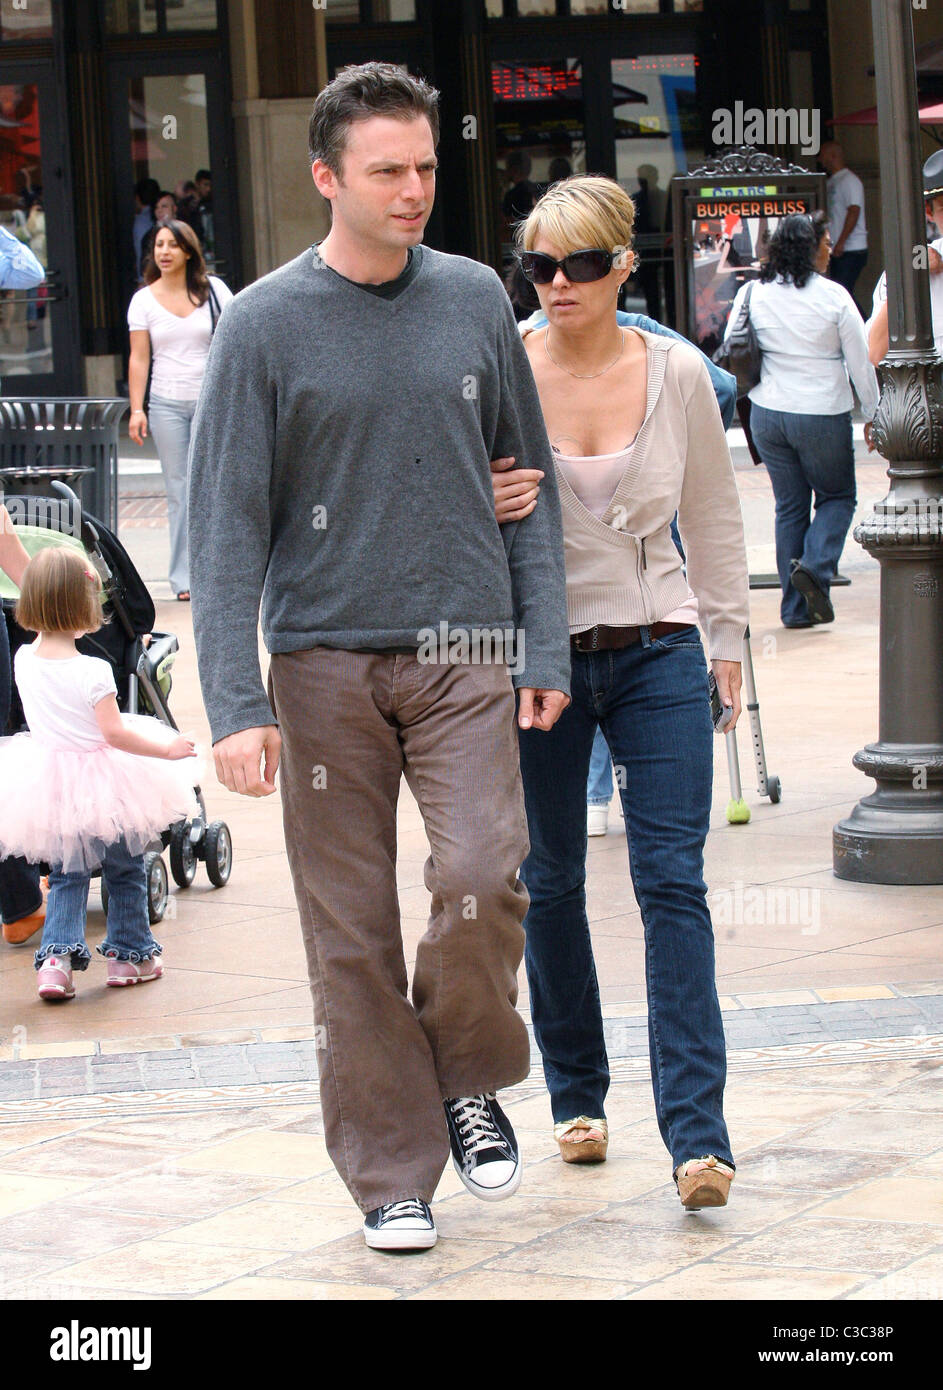 Weeds Star Justin Kirk Shopping In Hollywood With A Companion Los Angeles California 10 06 09 Owen Beiny Stock Photo Alamy